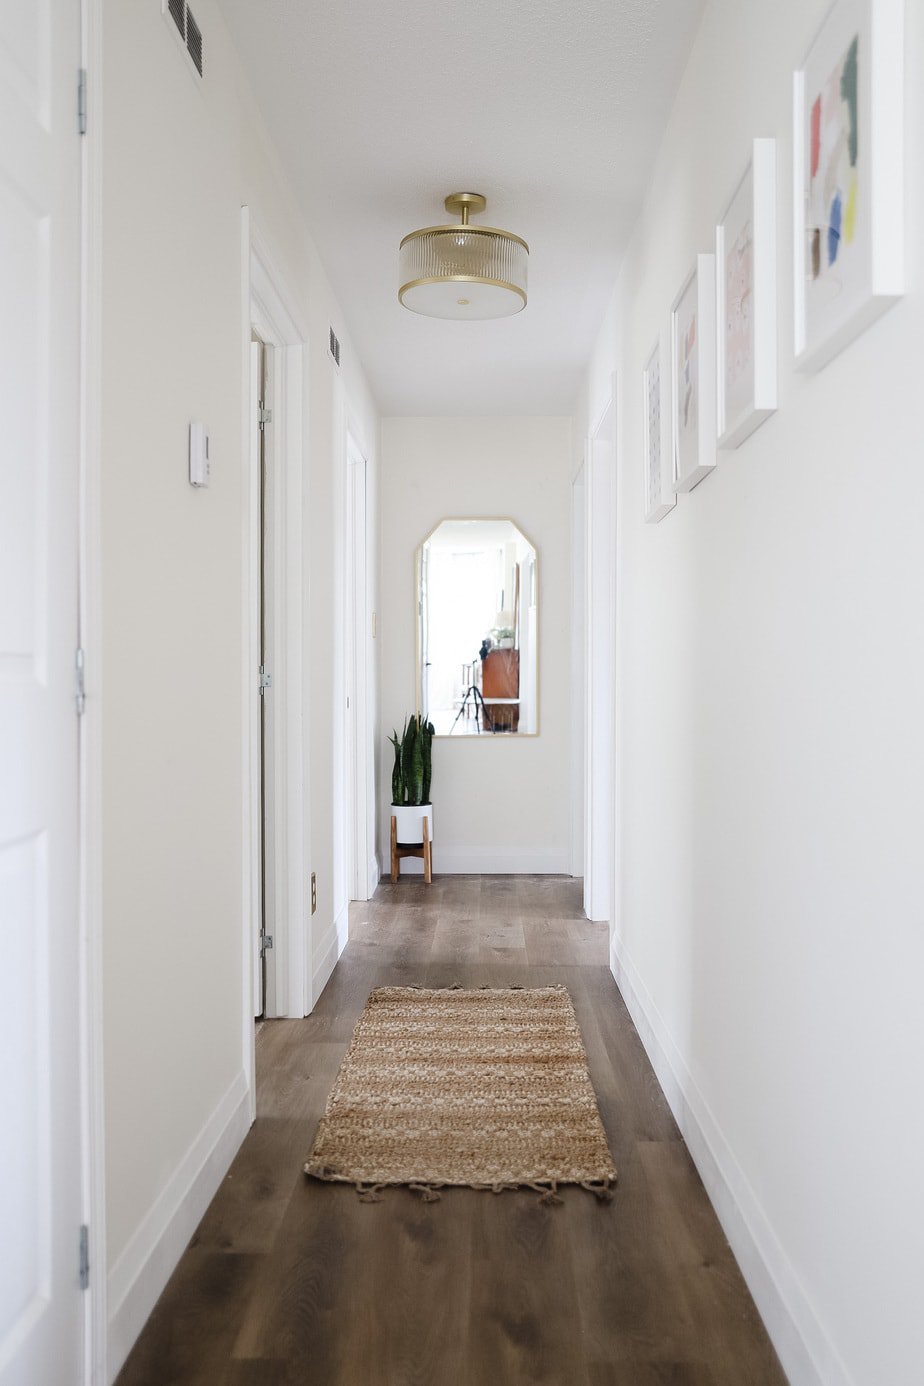 Top Decorating Ideas For A Dark, Narrow, Or Small Hallway - Cottage Living  And Style